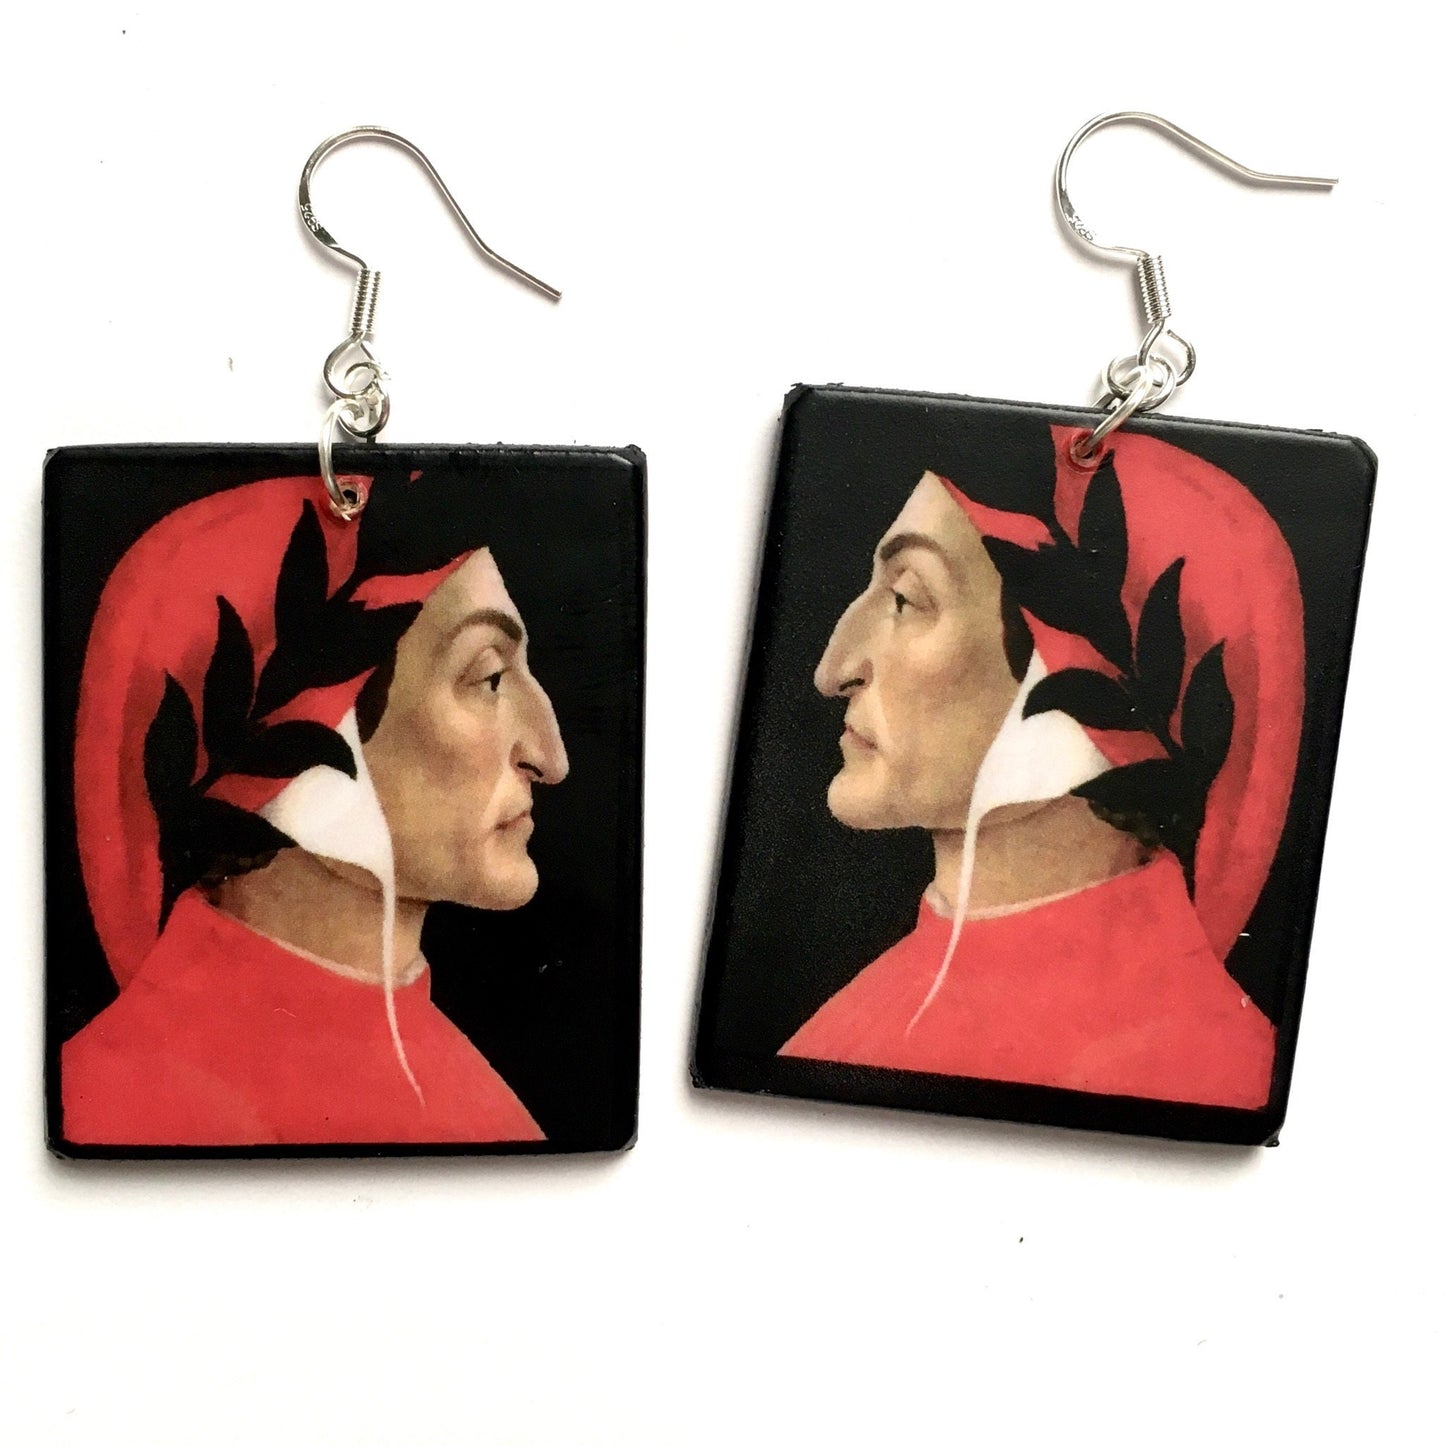 Earrings on wood with Dante Alighieri portrait painting by Botticelli, Renaissance earrings. Black an red are the predominant colours. Sterling silver hooks. Obljewellery Botticelli collection